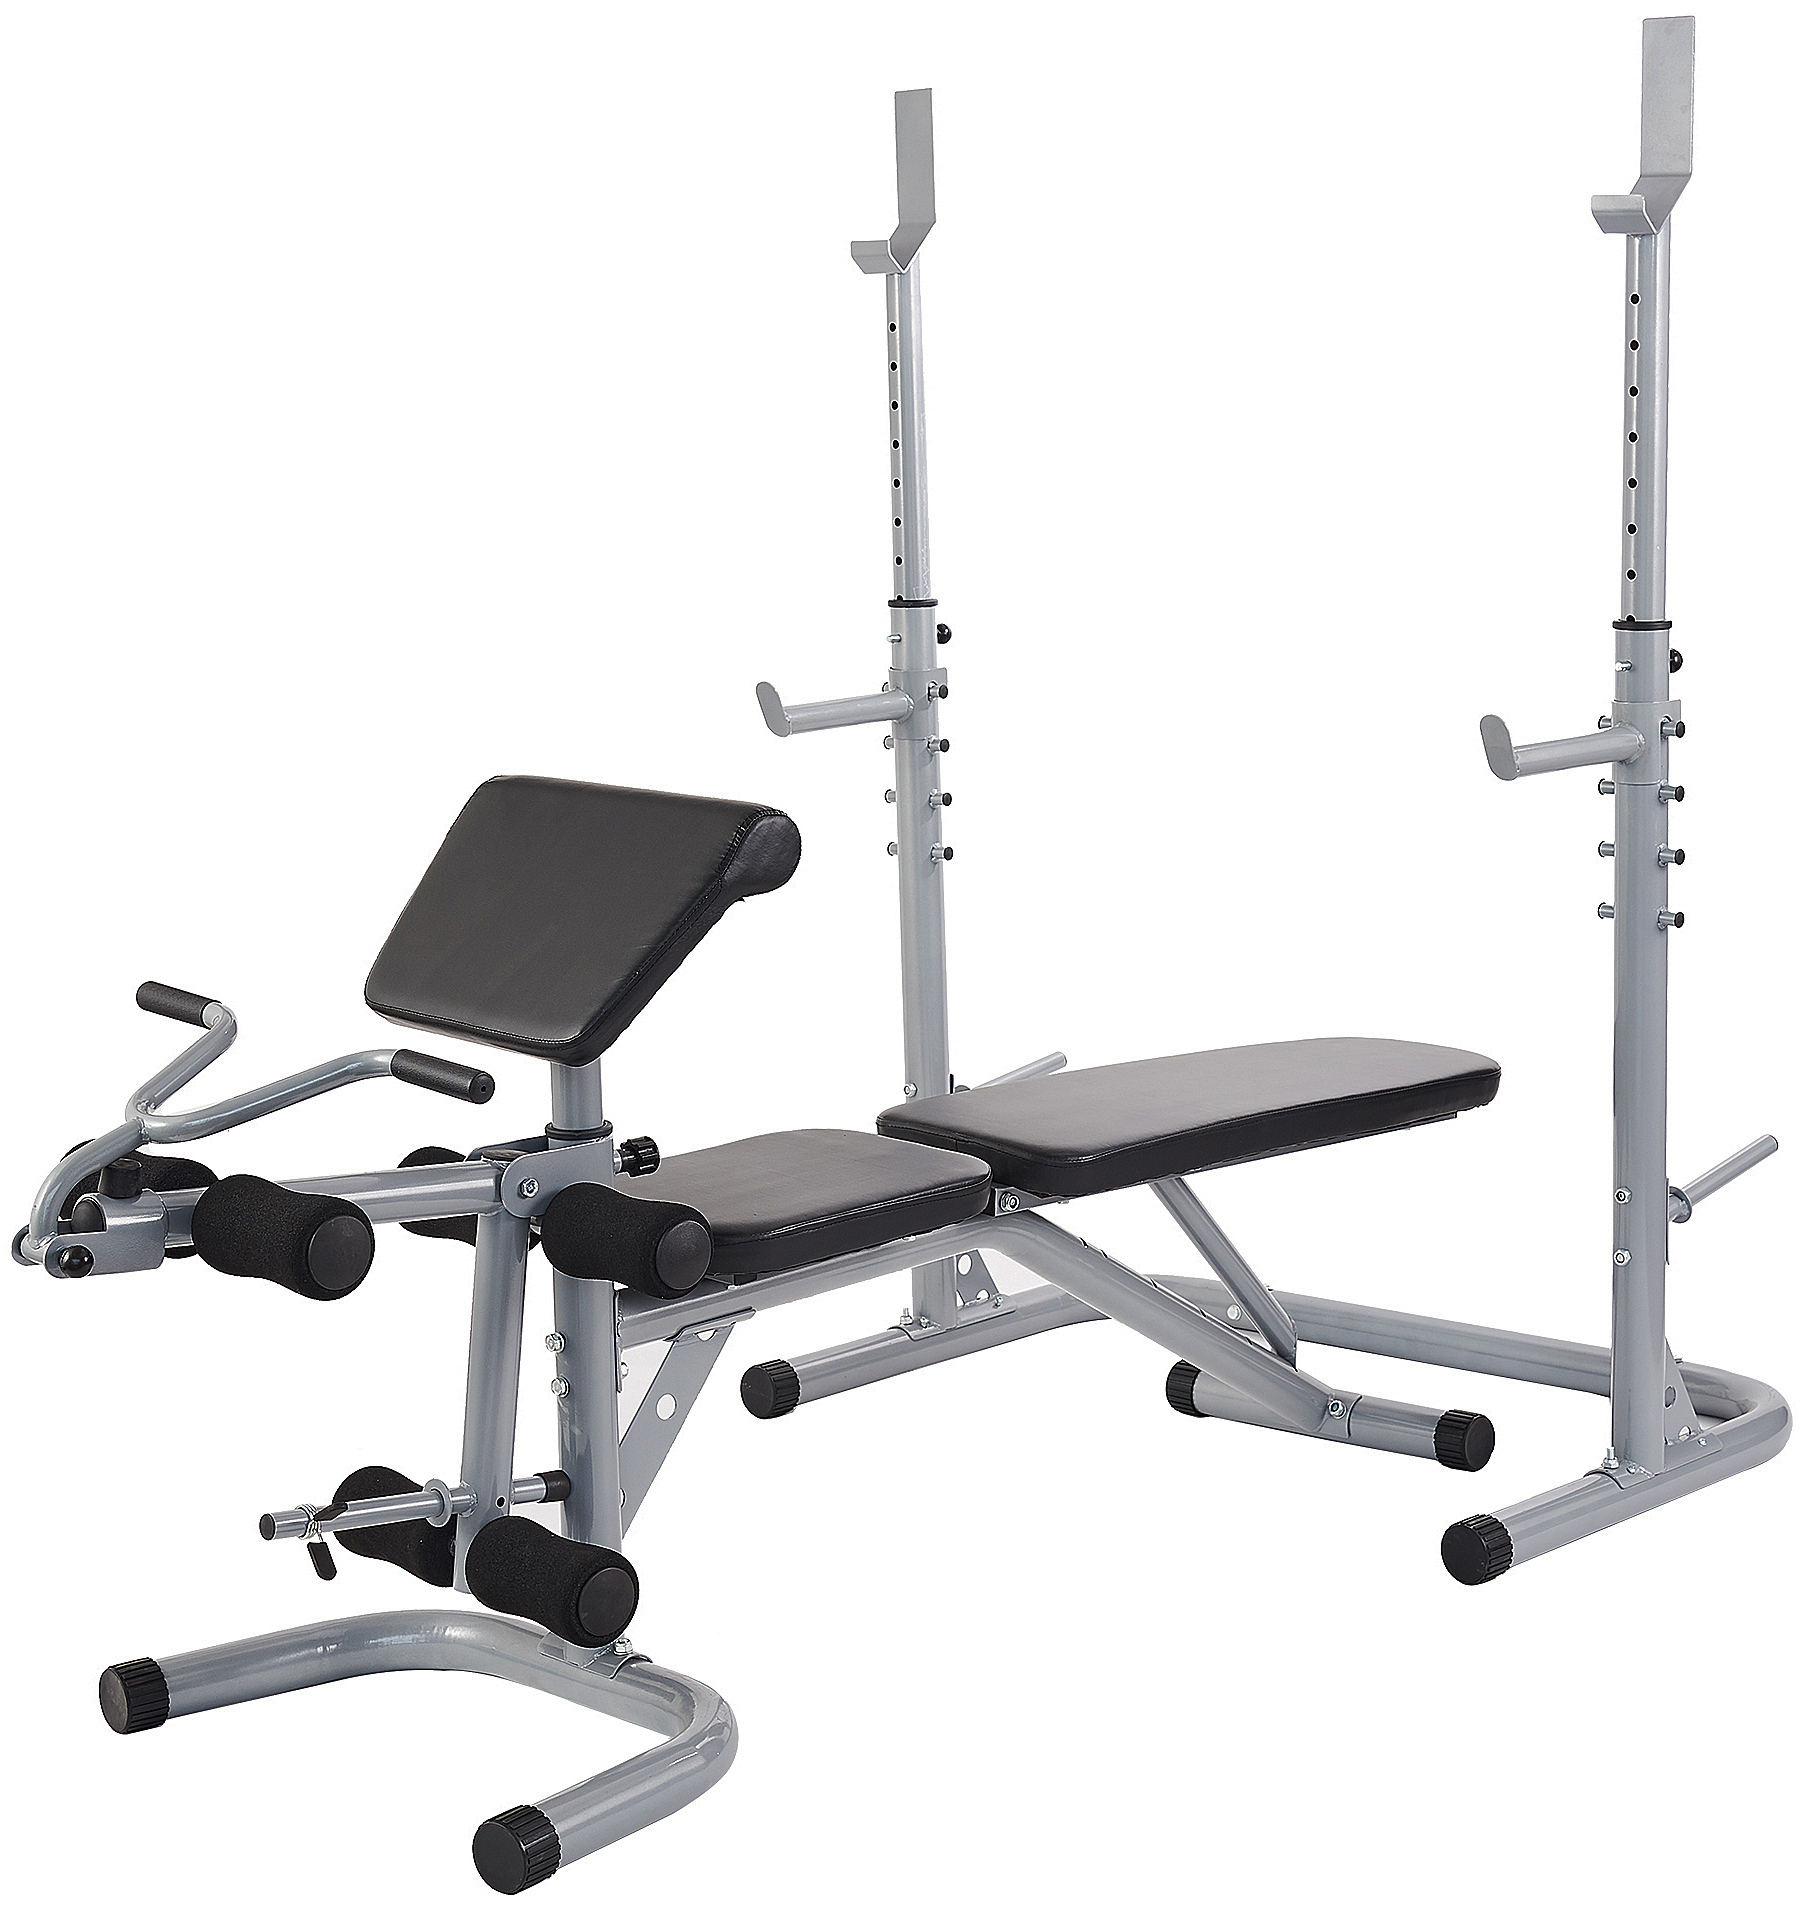 Everyday Essentials Multifunctional Workout Station Adjustable Olympic Workout Bench with Squat Rack, Leg Extension, Preacher Curl, and Weight Storage - image 3 of 6